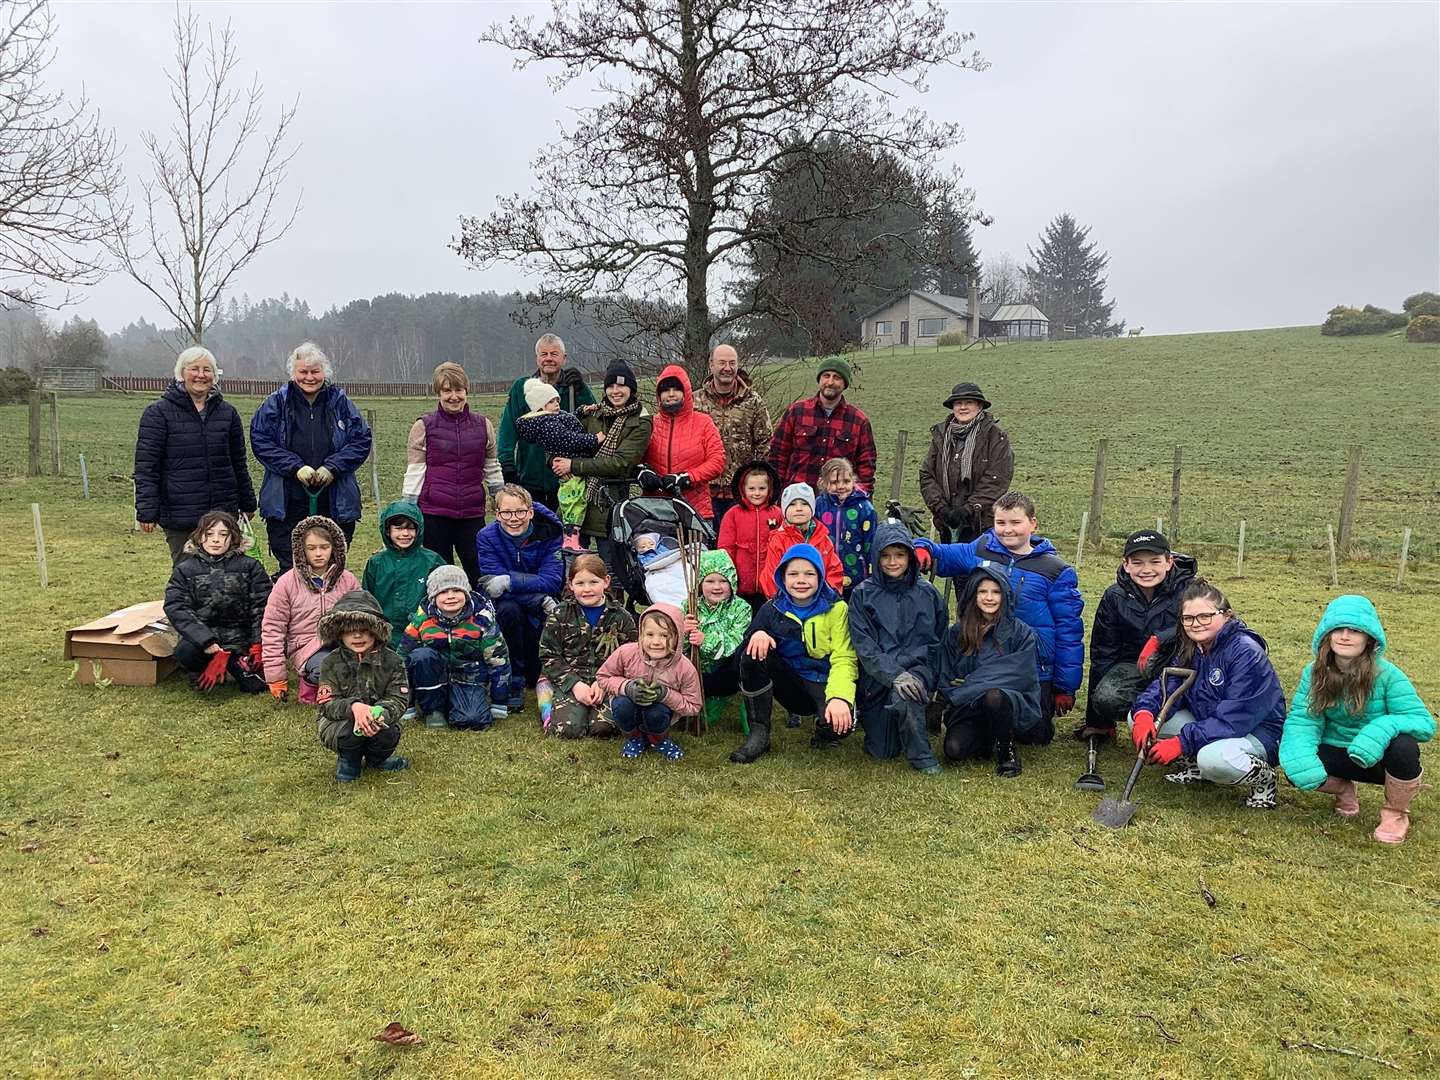 The report highlights how Cairney School encourages extra-curricular activities – Cairney School pupils plant trees for the 2022 Platinum Jubilee.